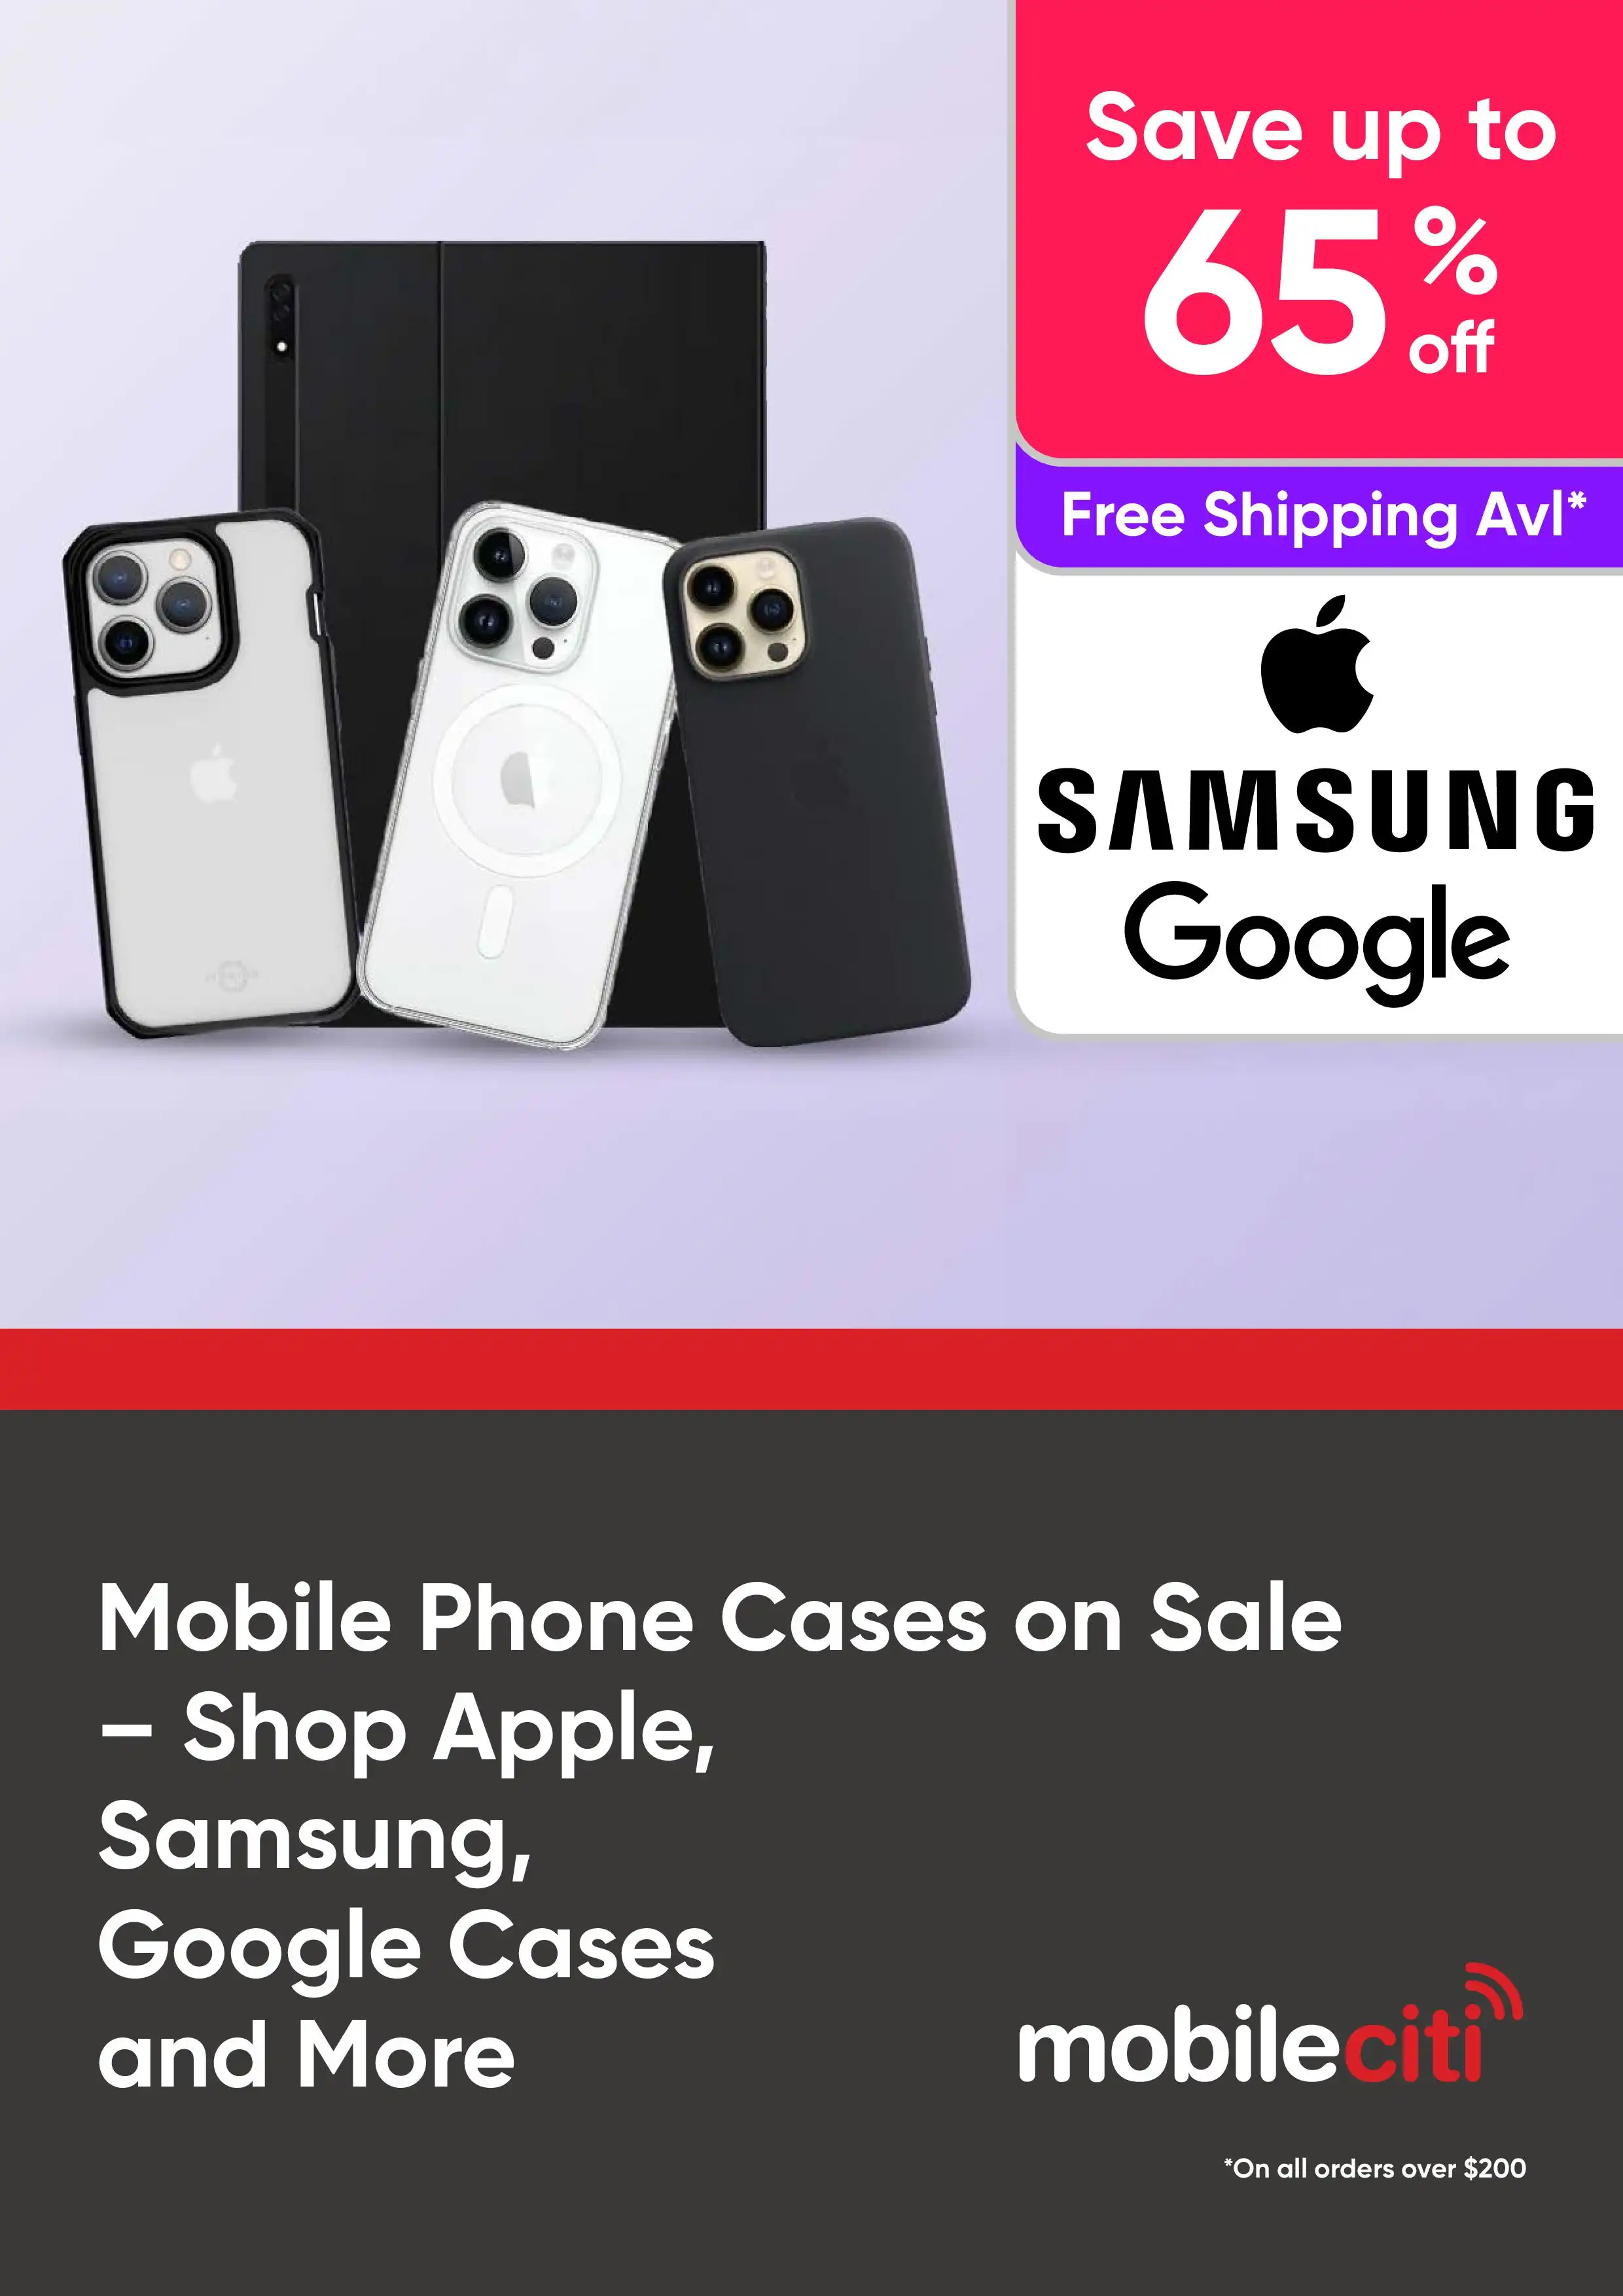 Shop Deals on Mobile Phone Cases - Save Up to 65% Off on Apple, Samsung, Google Cases and More